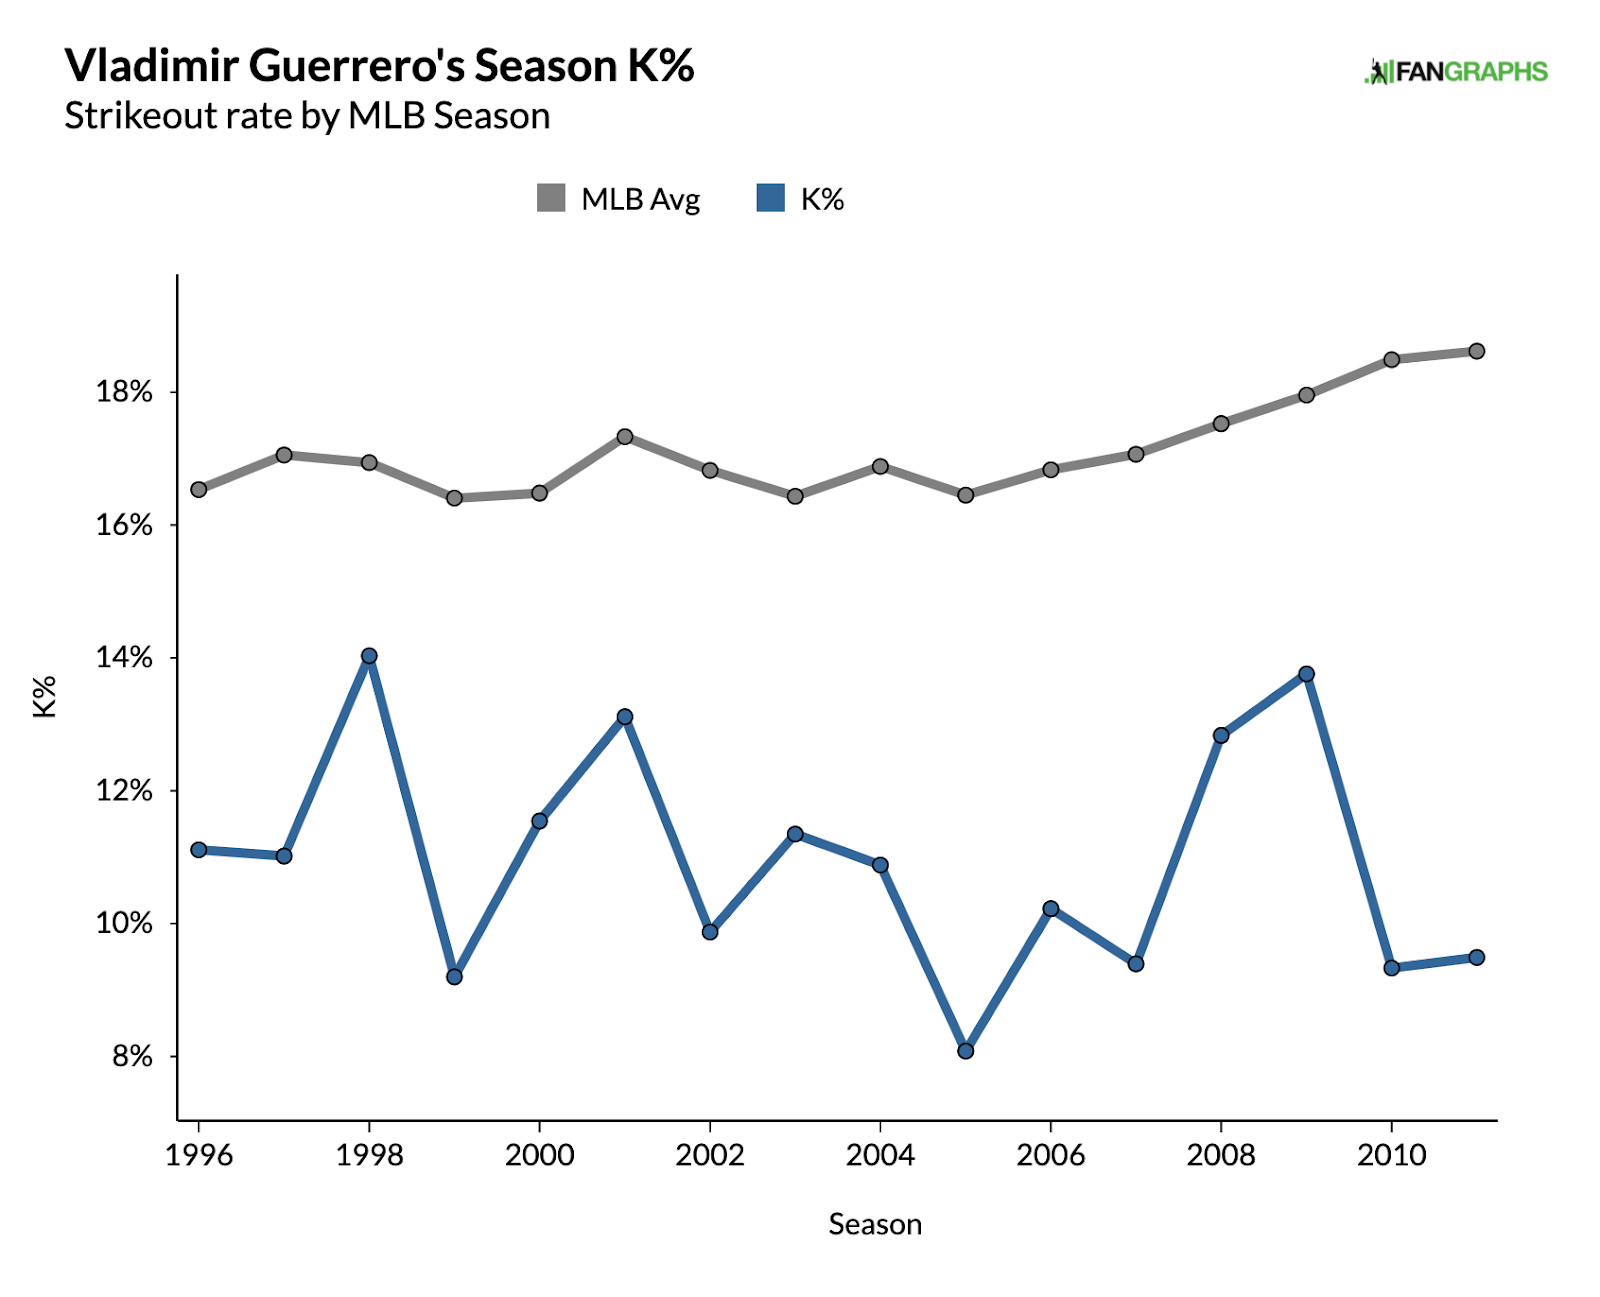 Vlad Guerrero and Vlad Jr. are Sharing More Than Just a Swing, They're  Sharing Stats - FanBuzz